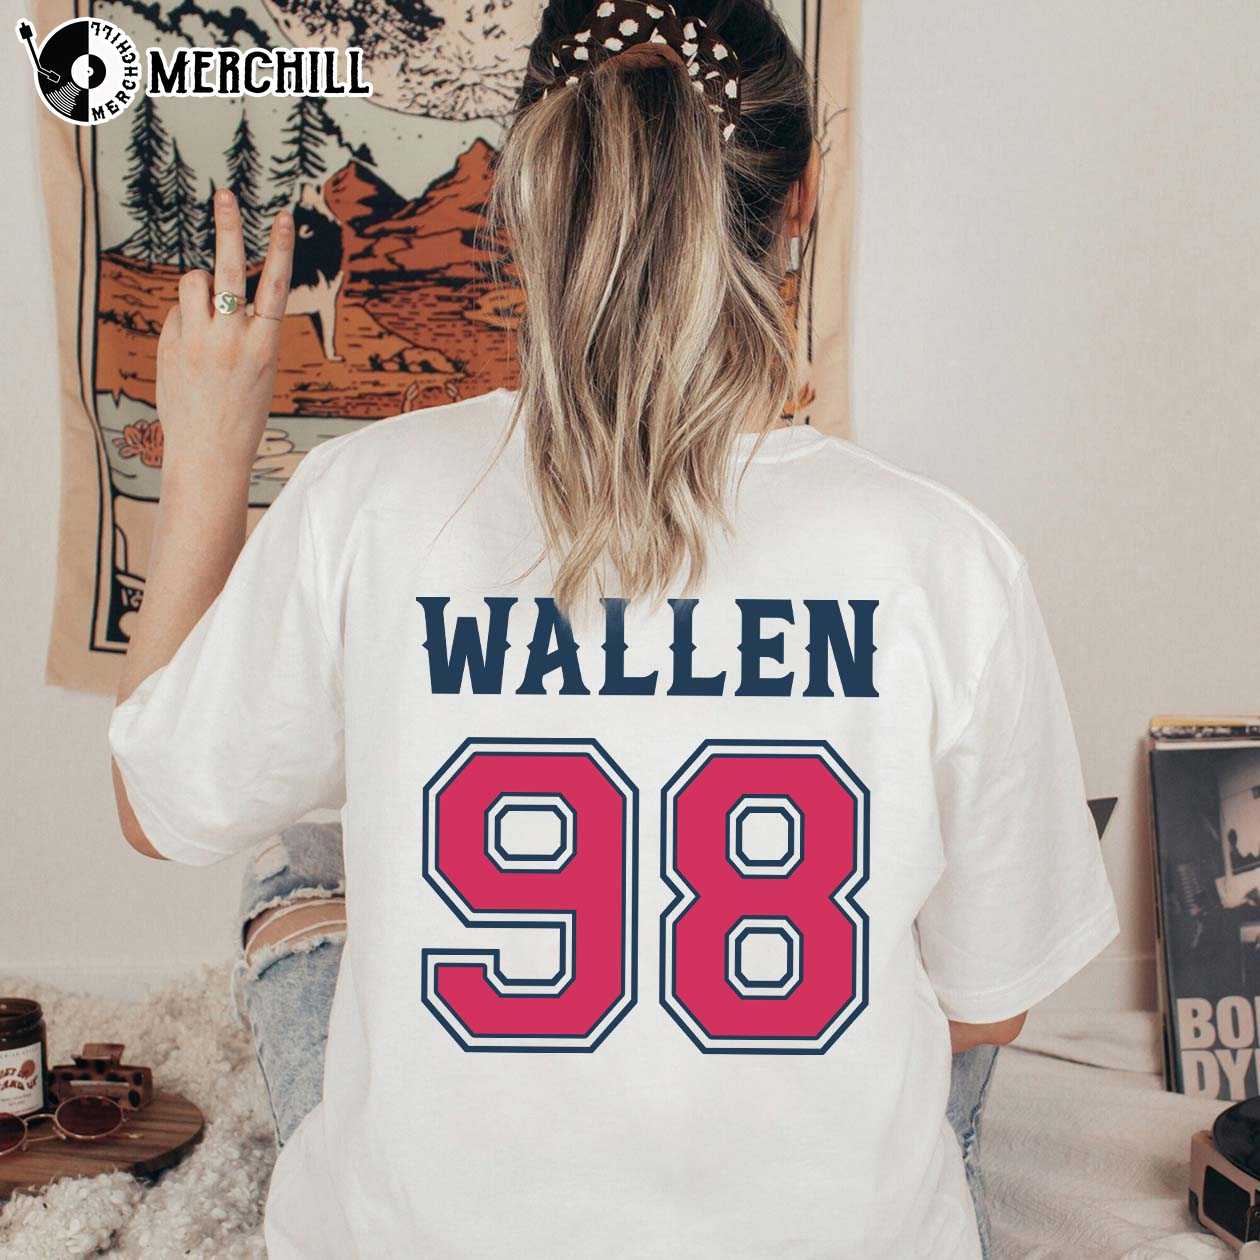 98 Braves Morgan Wallen Song Shirt Atlanta Graphic Tee - Happy Place for  Music Lovers